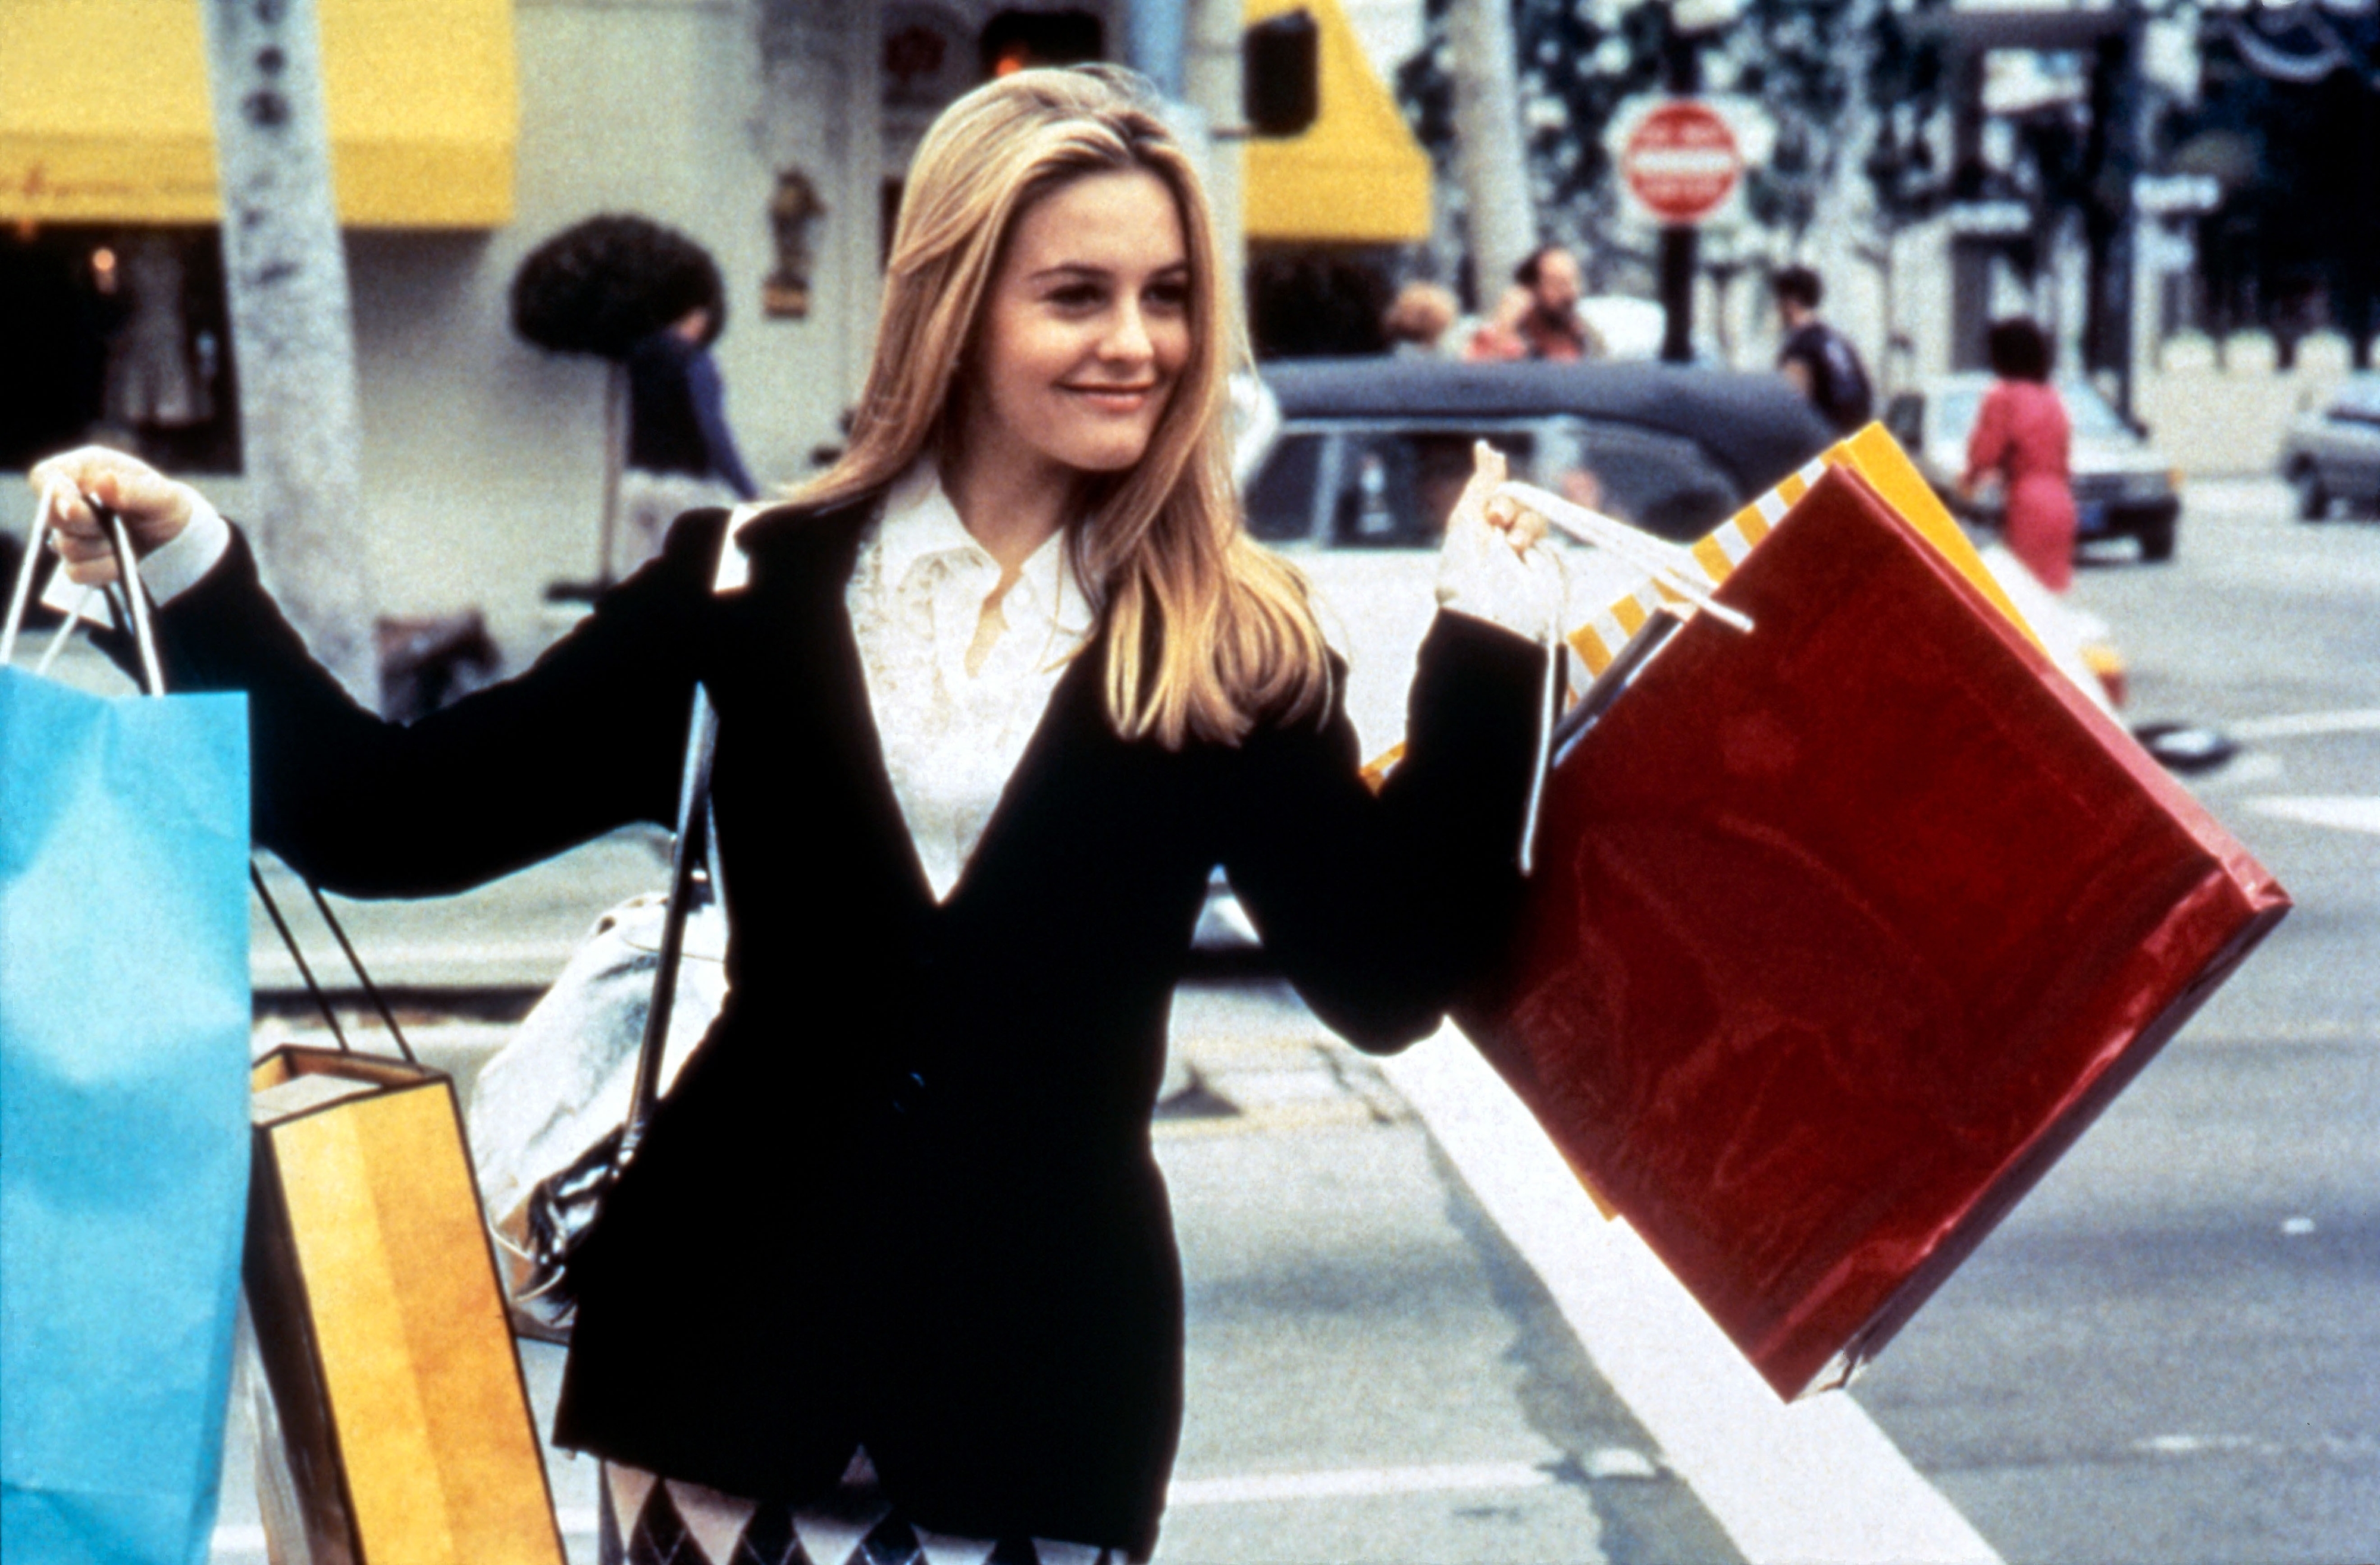 Cher Horowitz from Clueless smiling, holding shopping bags on a city street. Wearing a blazer and skirt